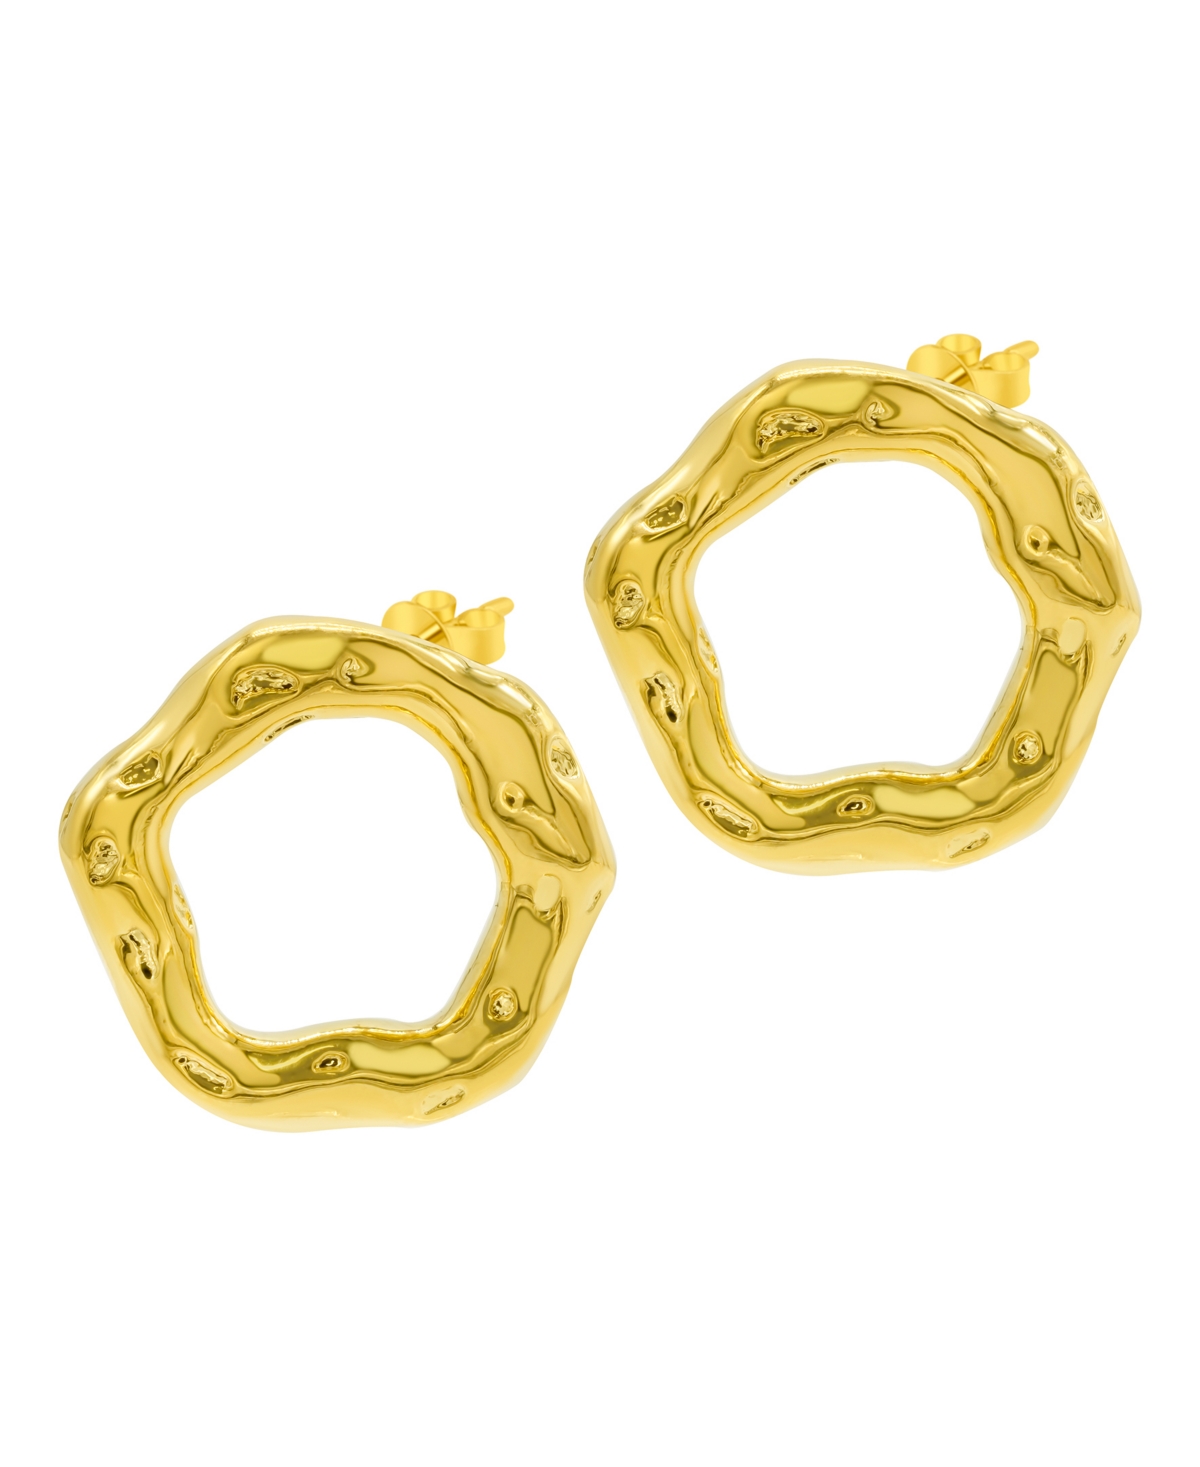 Shop Adornia Tarnish Resistant 14k Gold-plated Hammered Open Circle Earrings